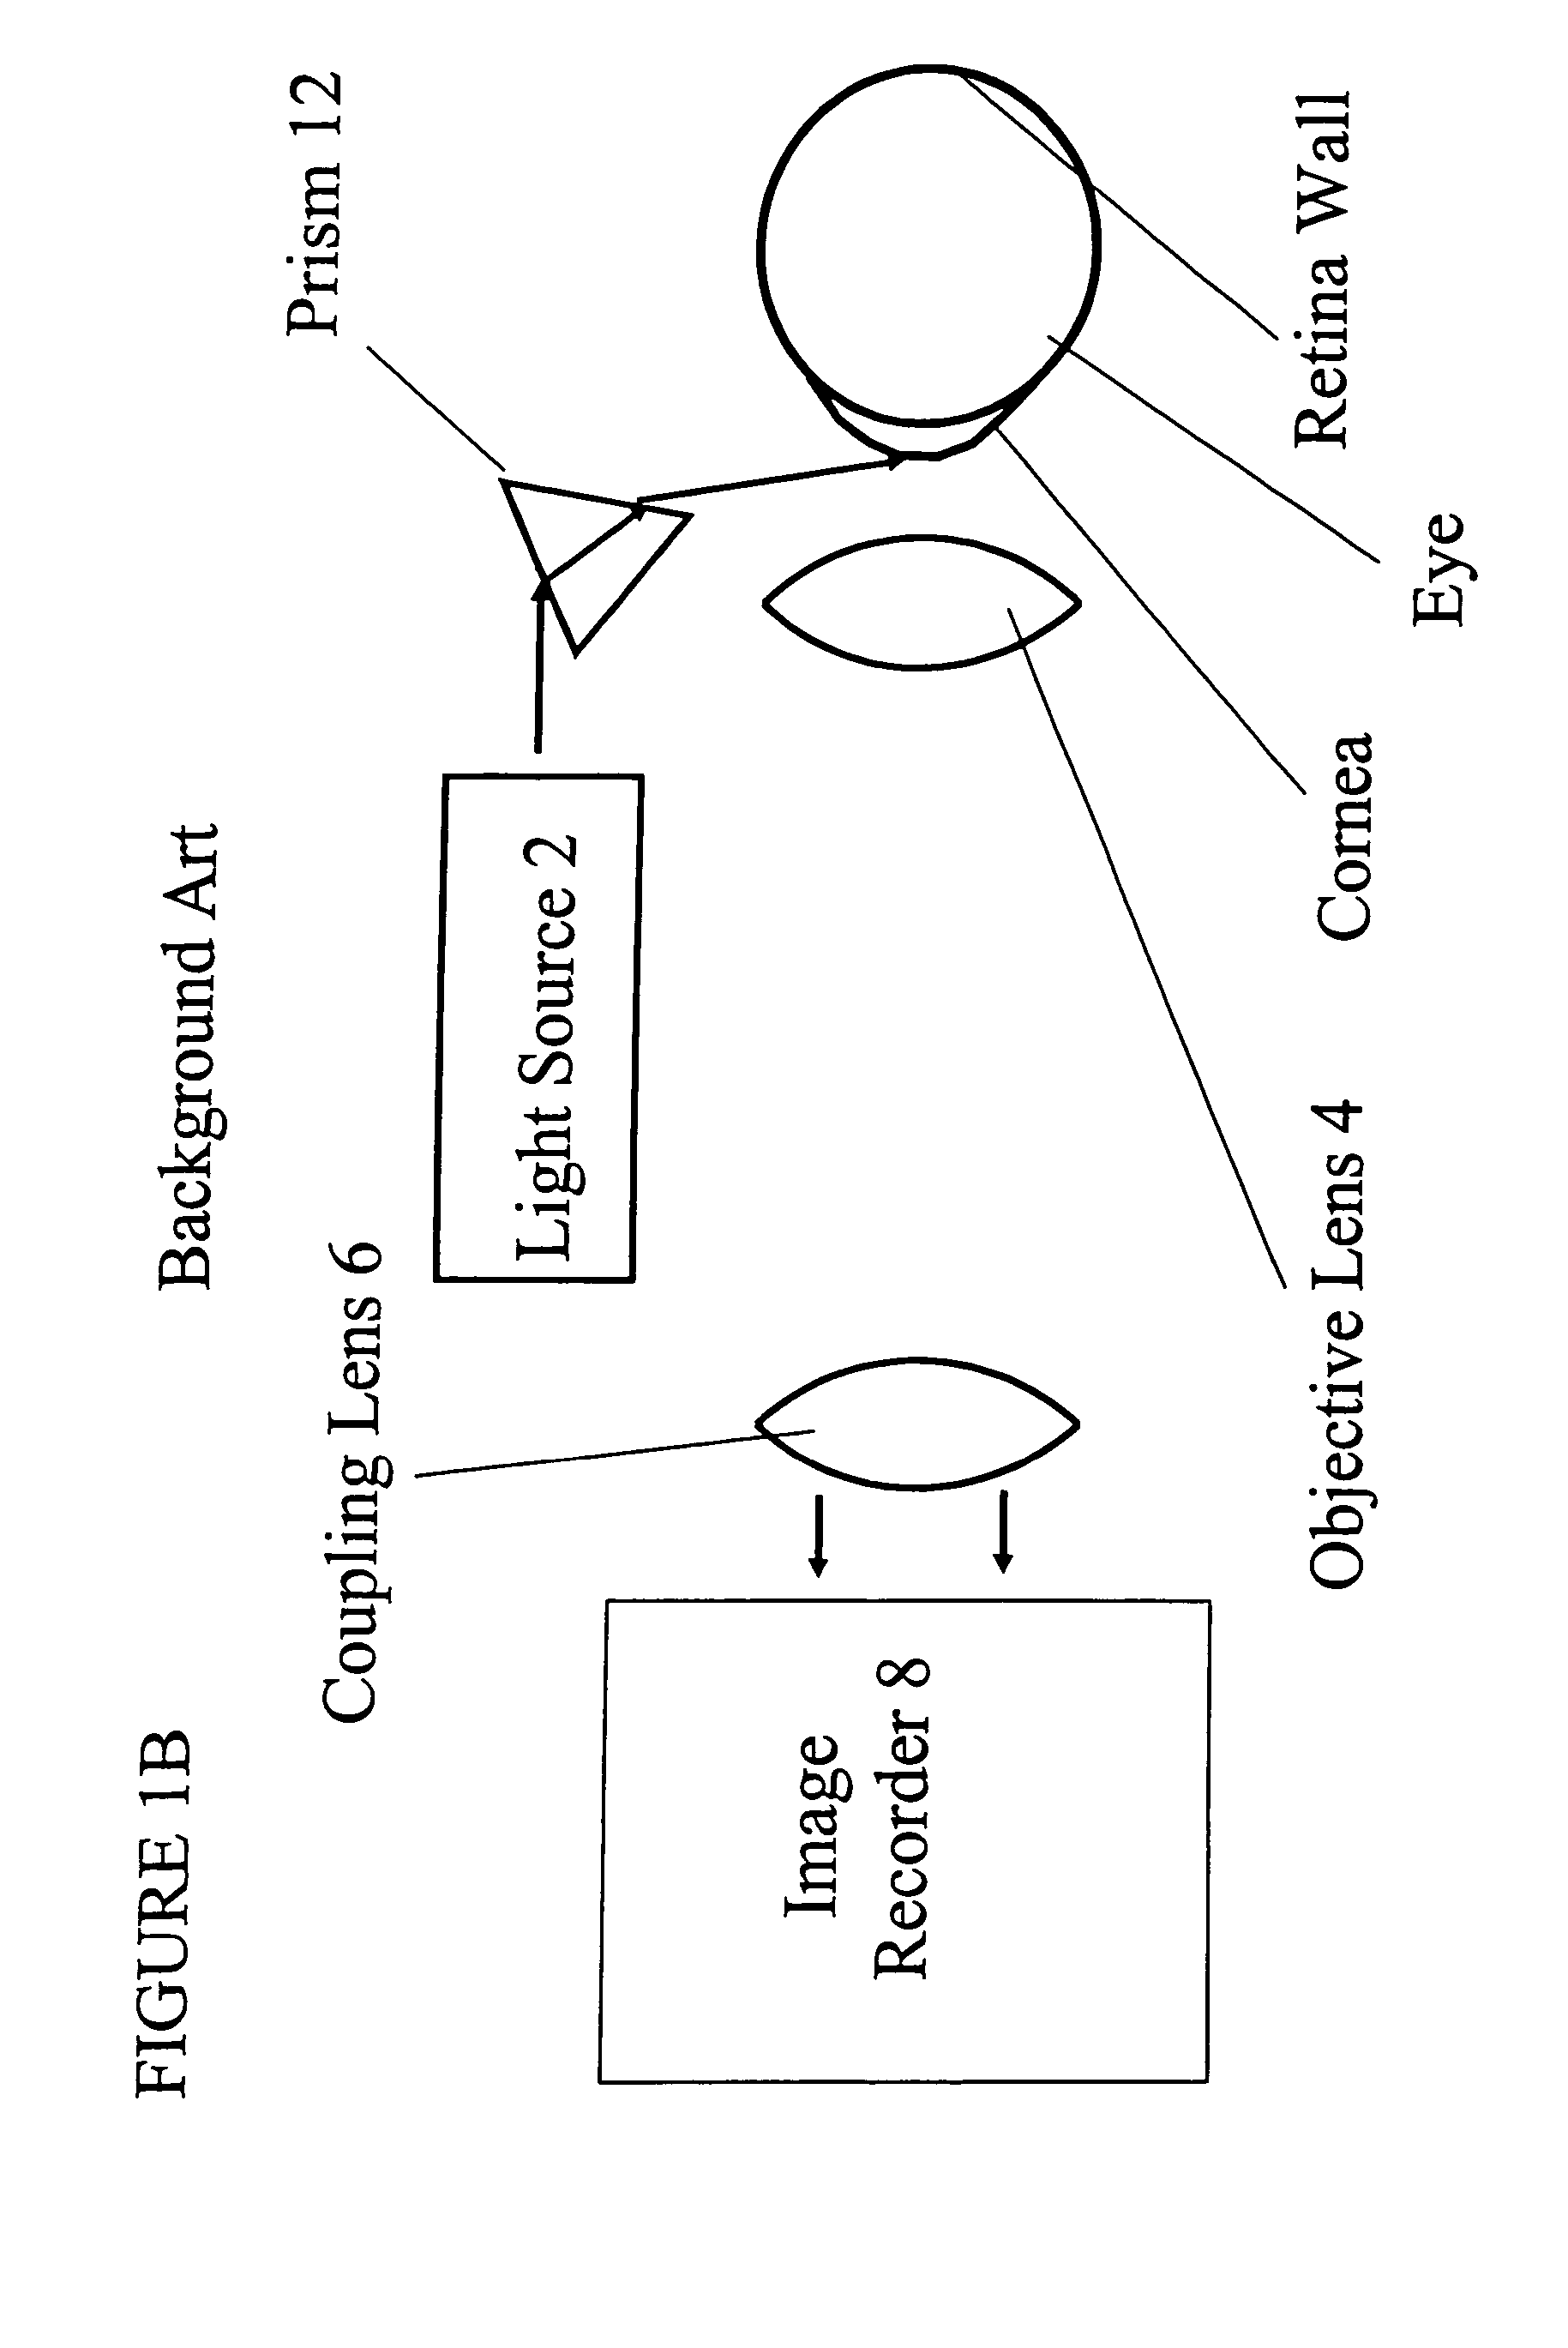 Imaging lens and illumination system